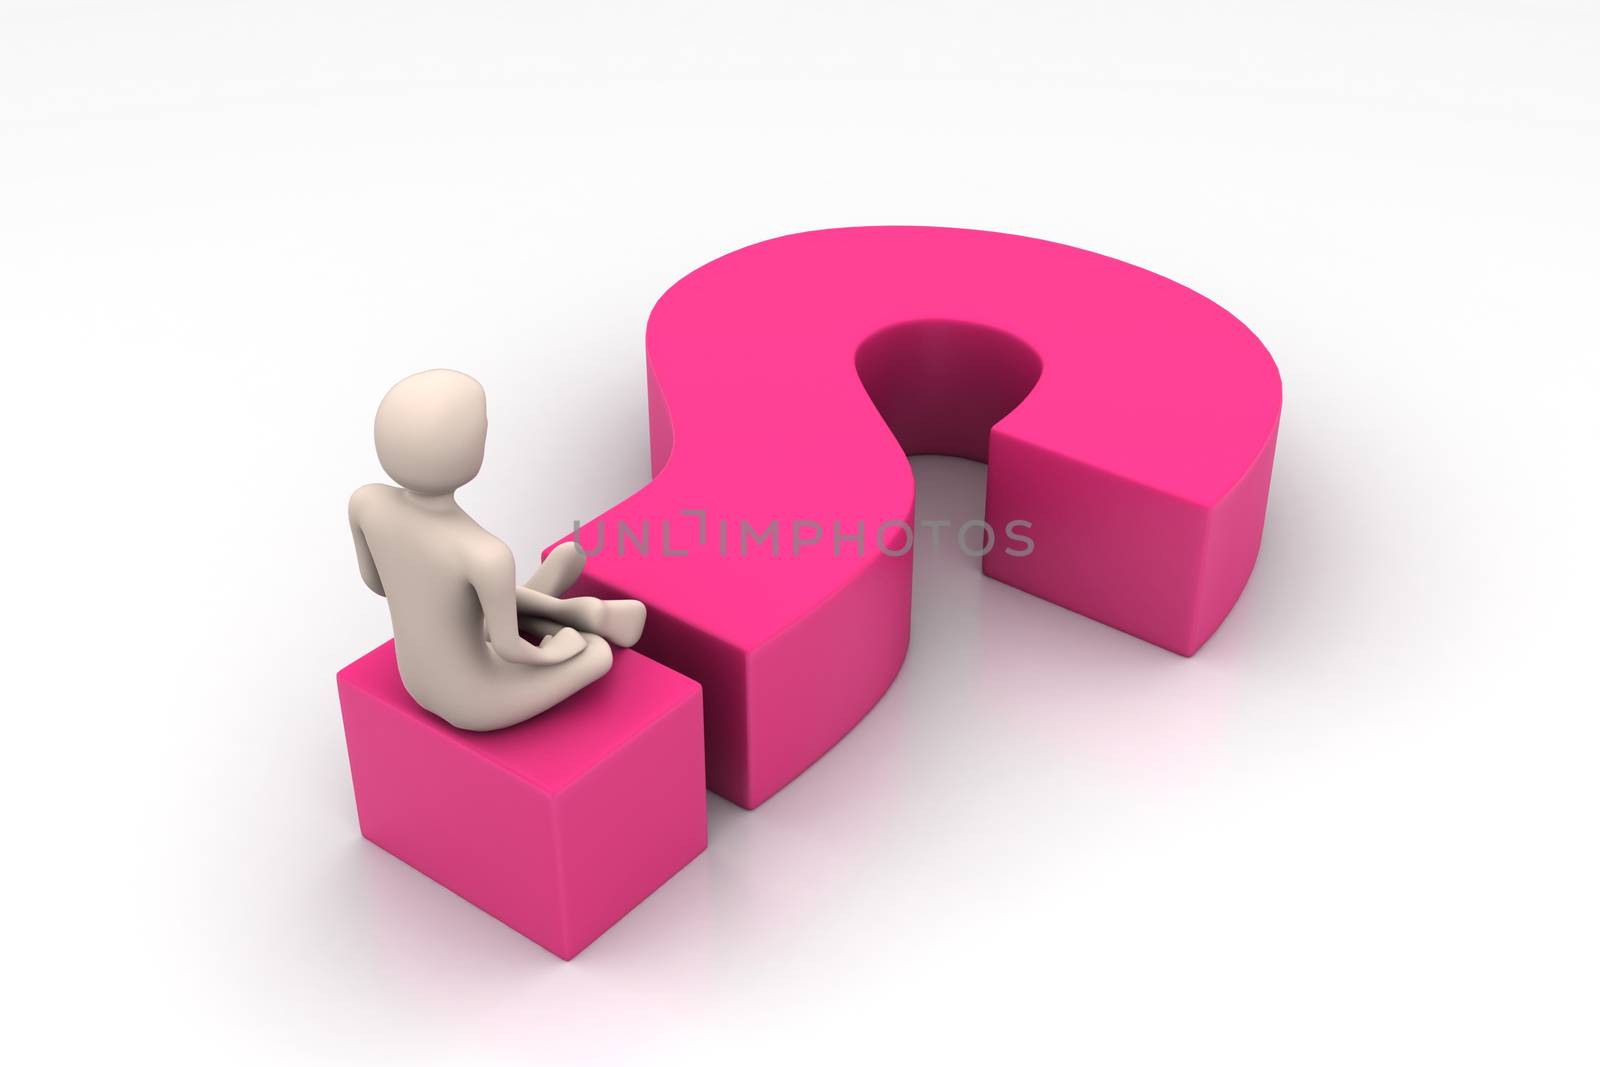 man sitting on a question mark. Business concept  by rbhavana